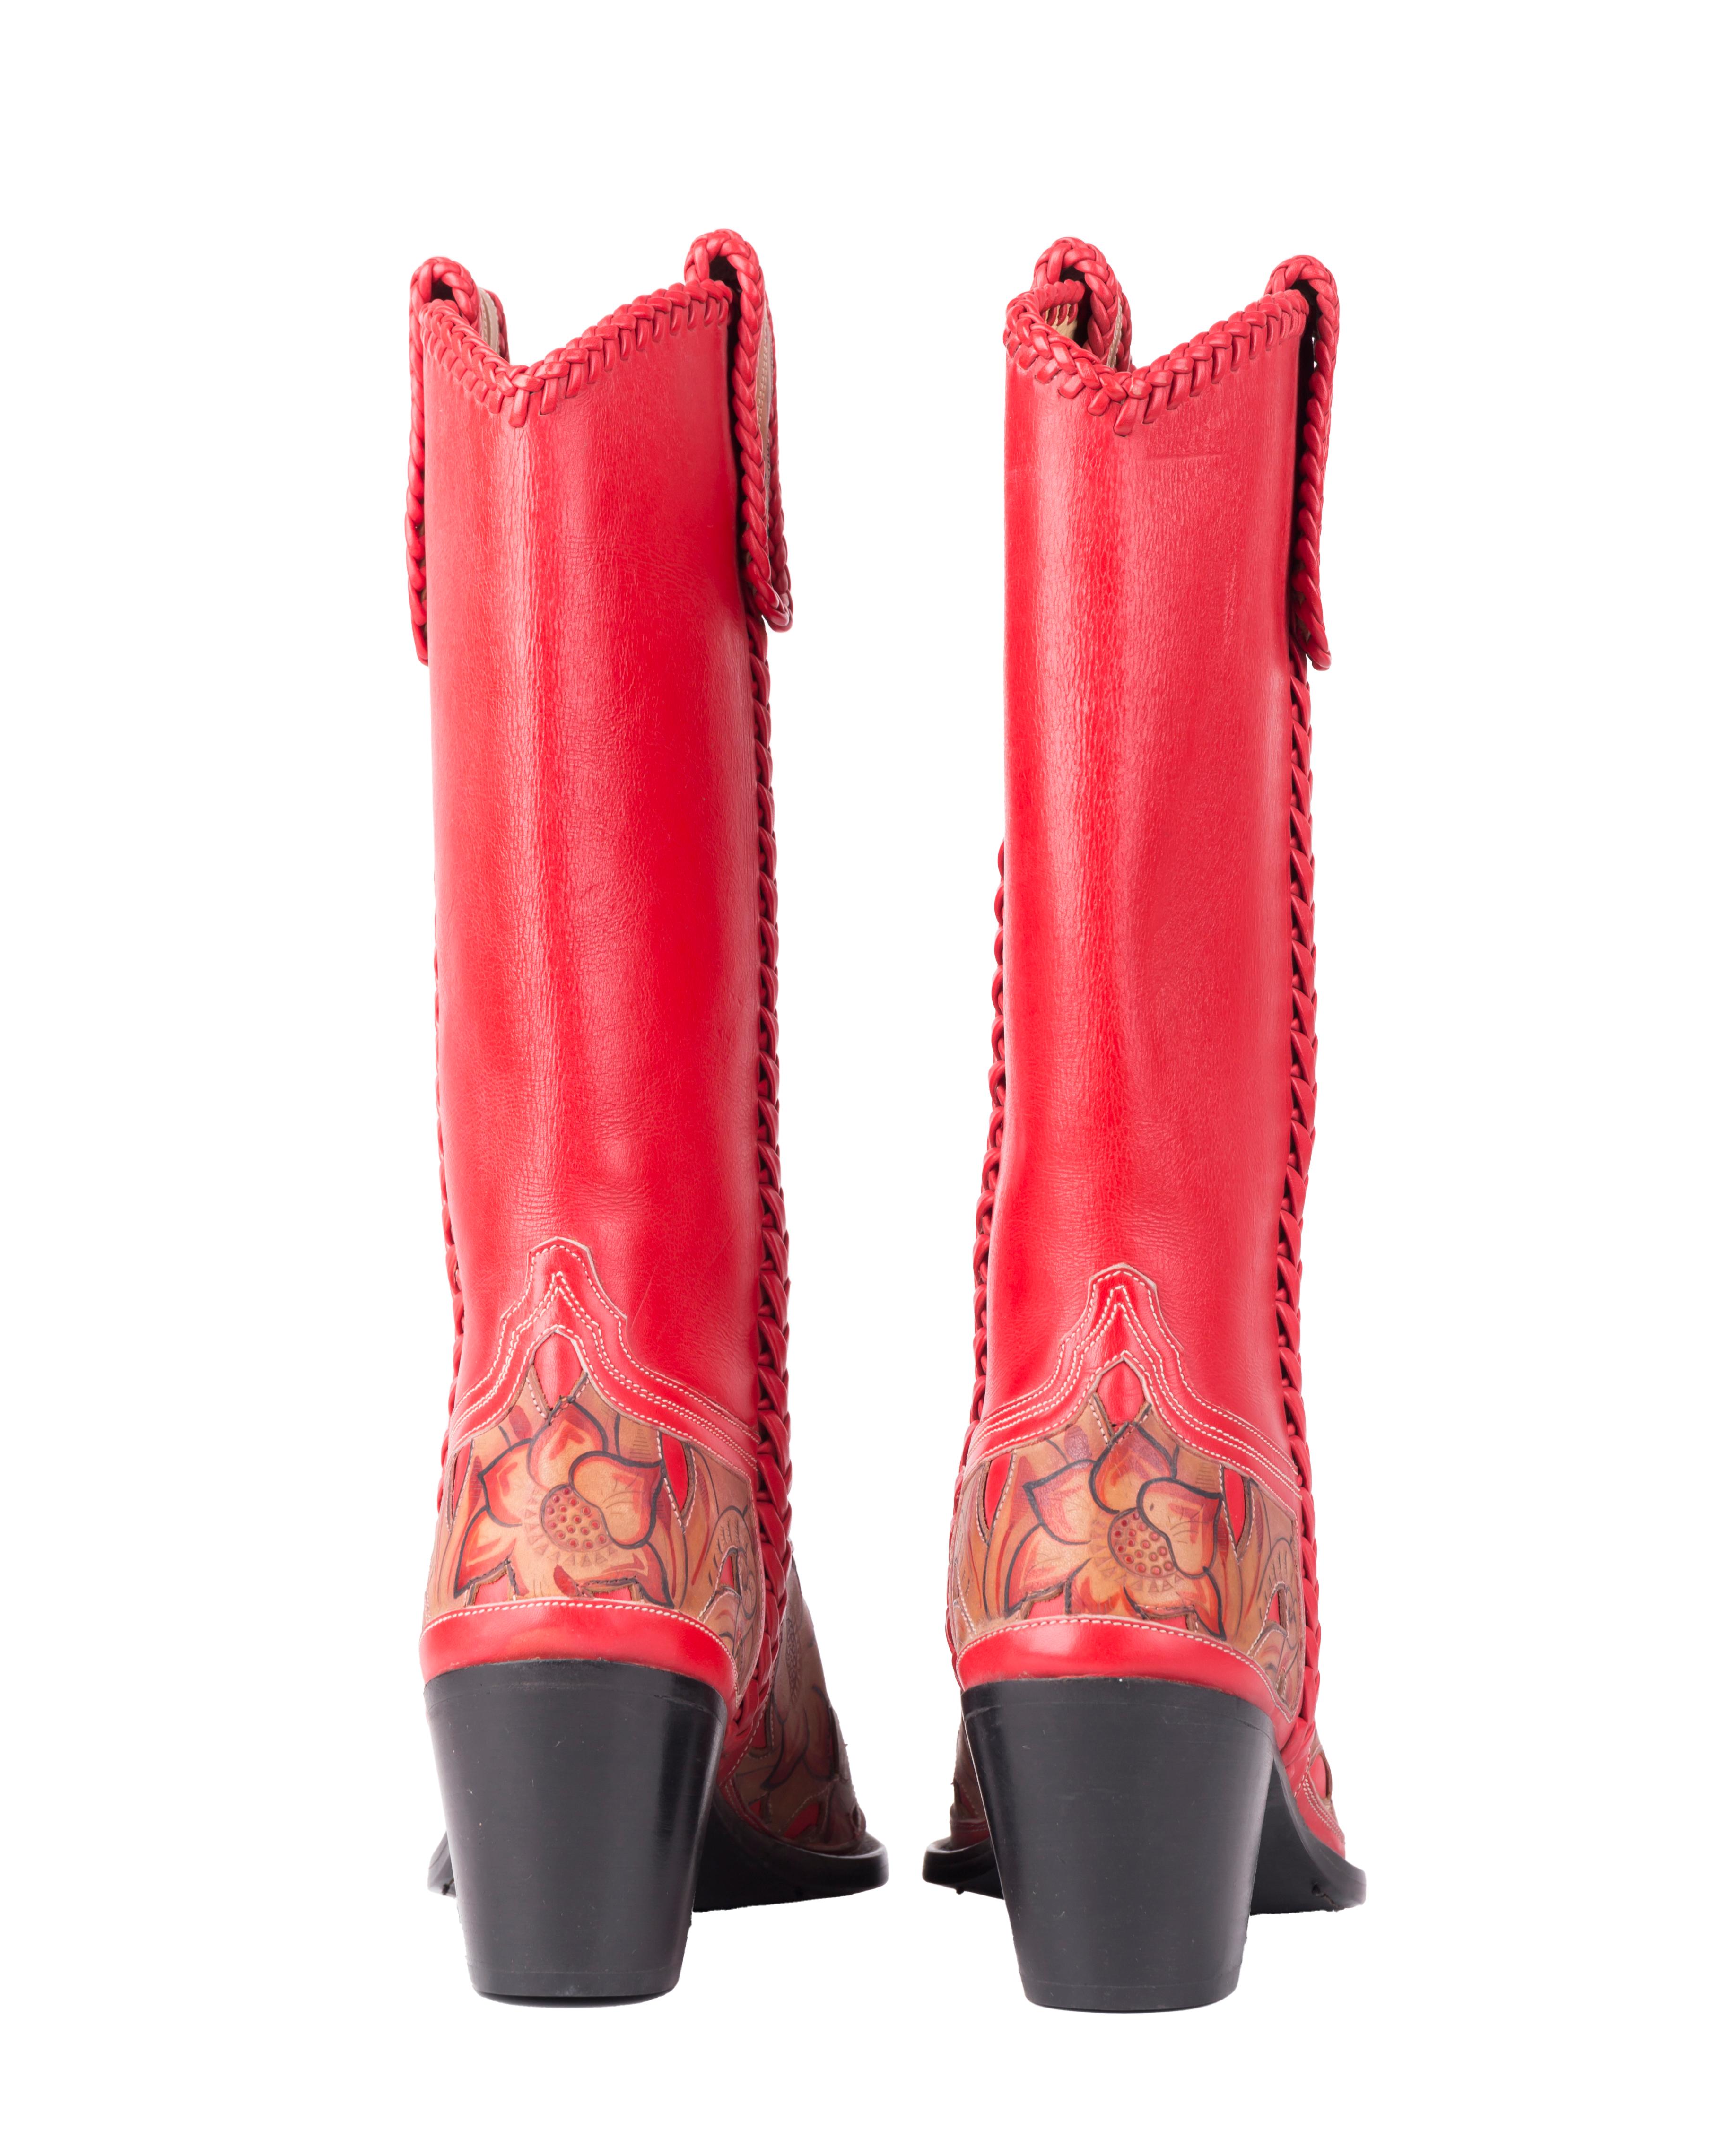 black and red cowboy boots